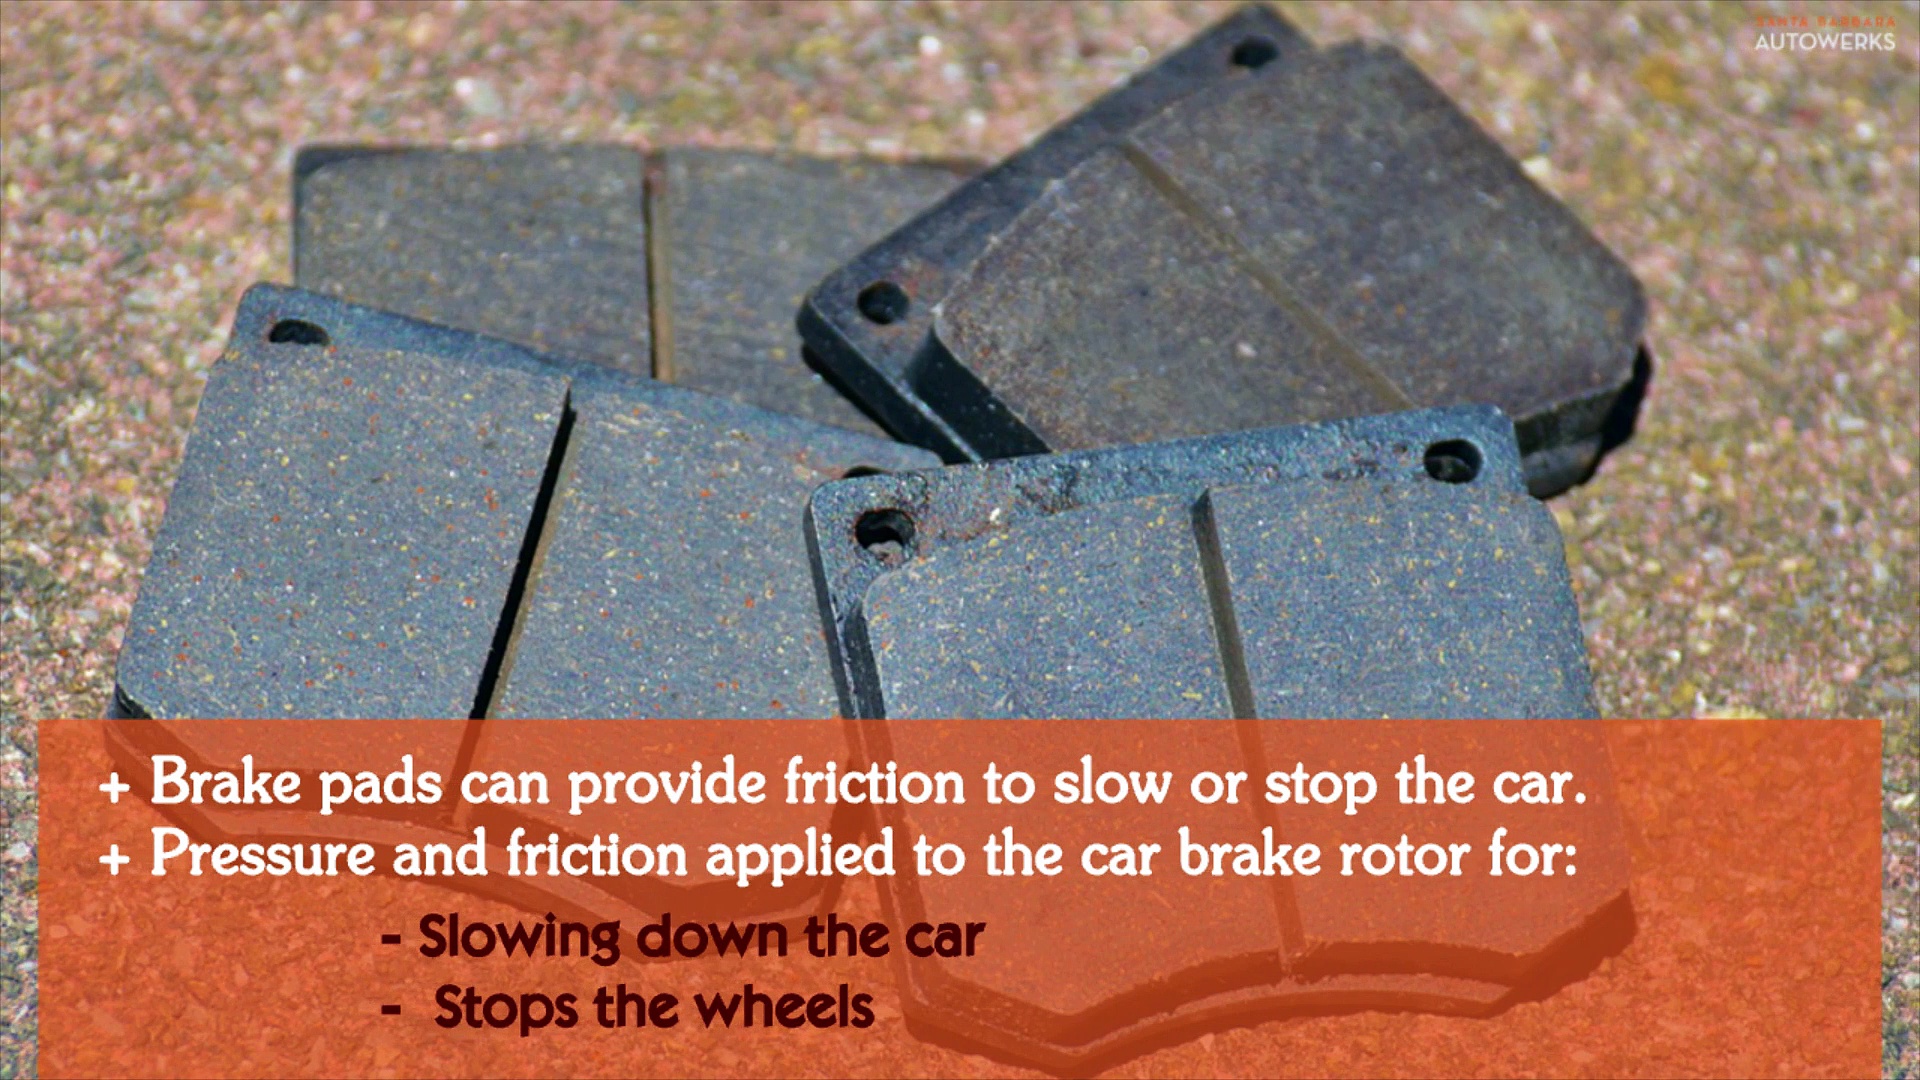 When do you need to Replace the Brake Pads of the Car